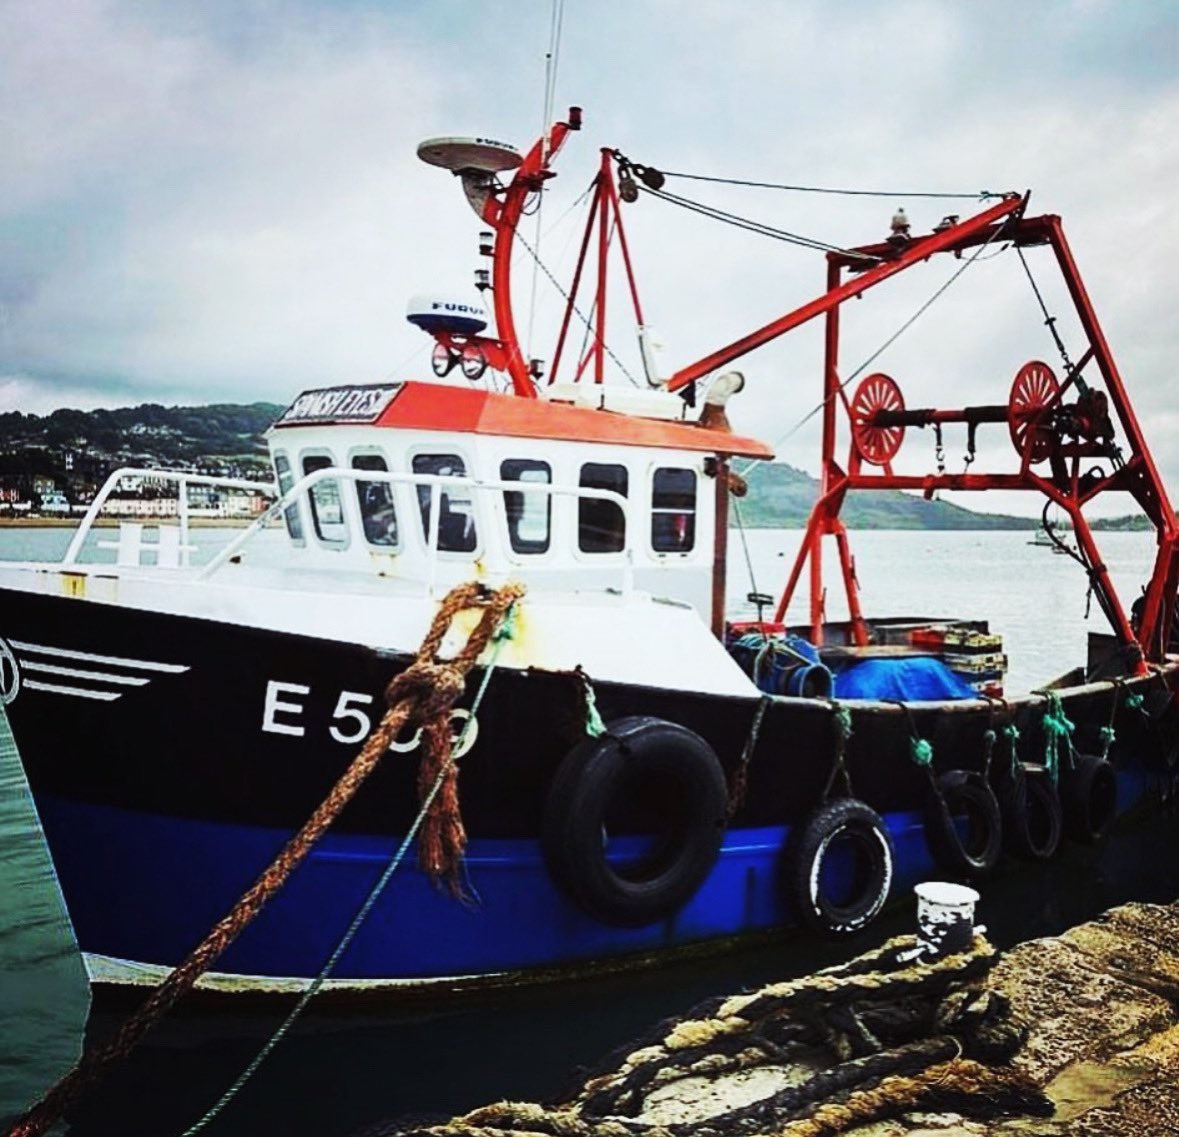 #MeetOurFleet 
This beauty is Luke Wason’s SPANISH EYES III in #LymeRegis 
You can meet more of our fleet on our website. 
#fishing #fisherman #collaboration #cic #lowimpact #eatlocal #seafood